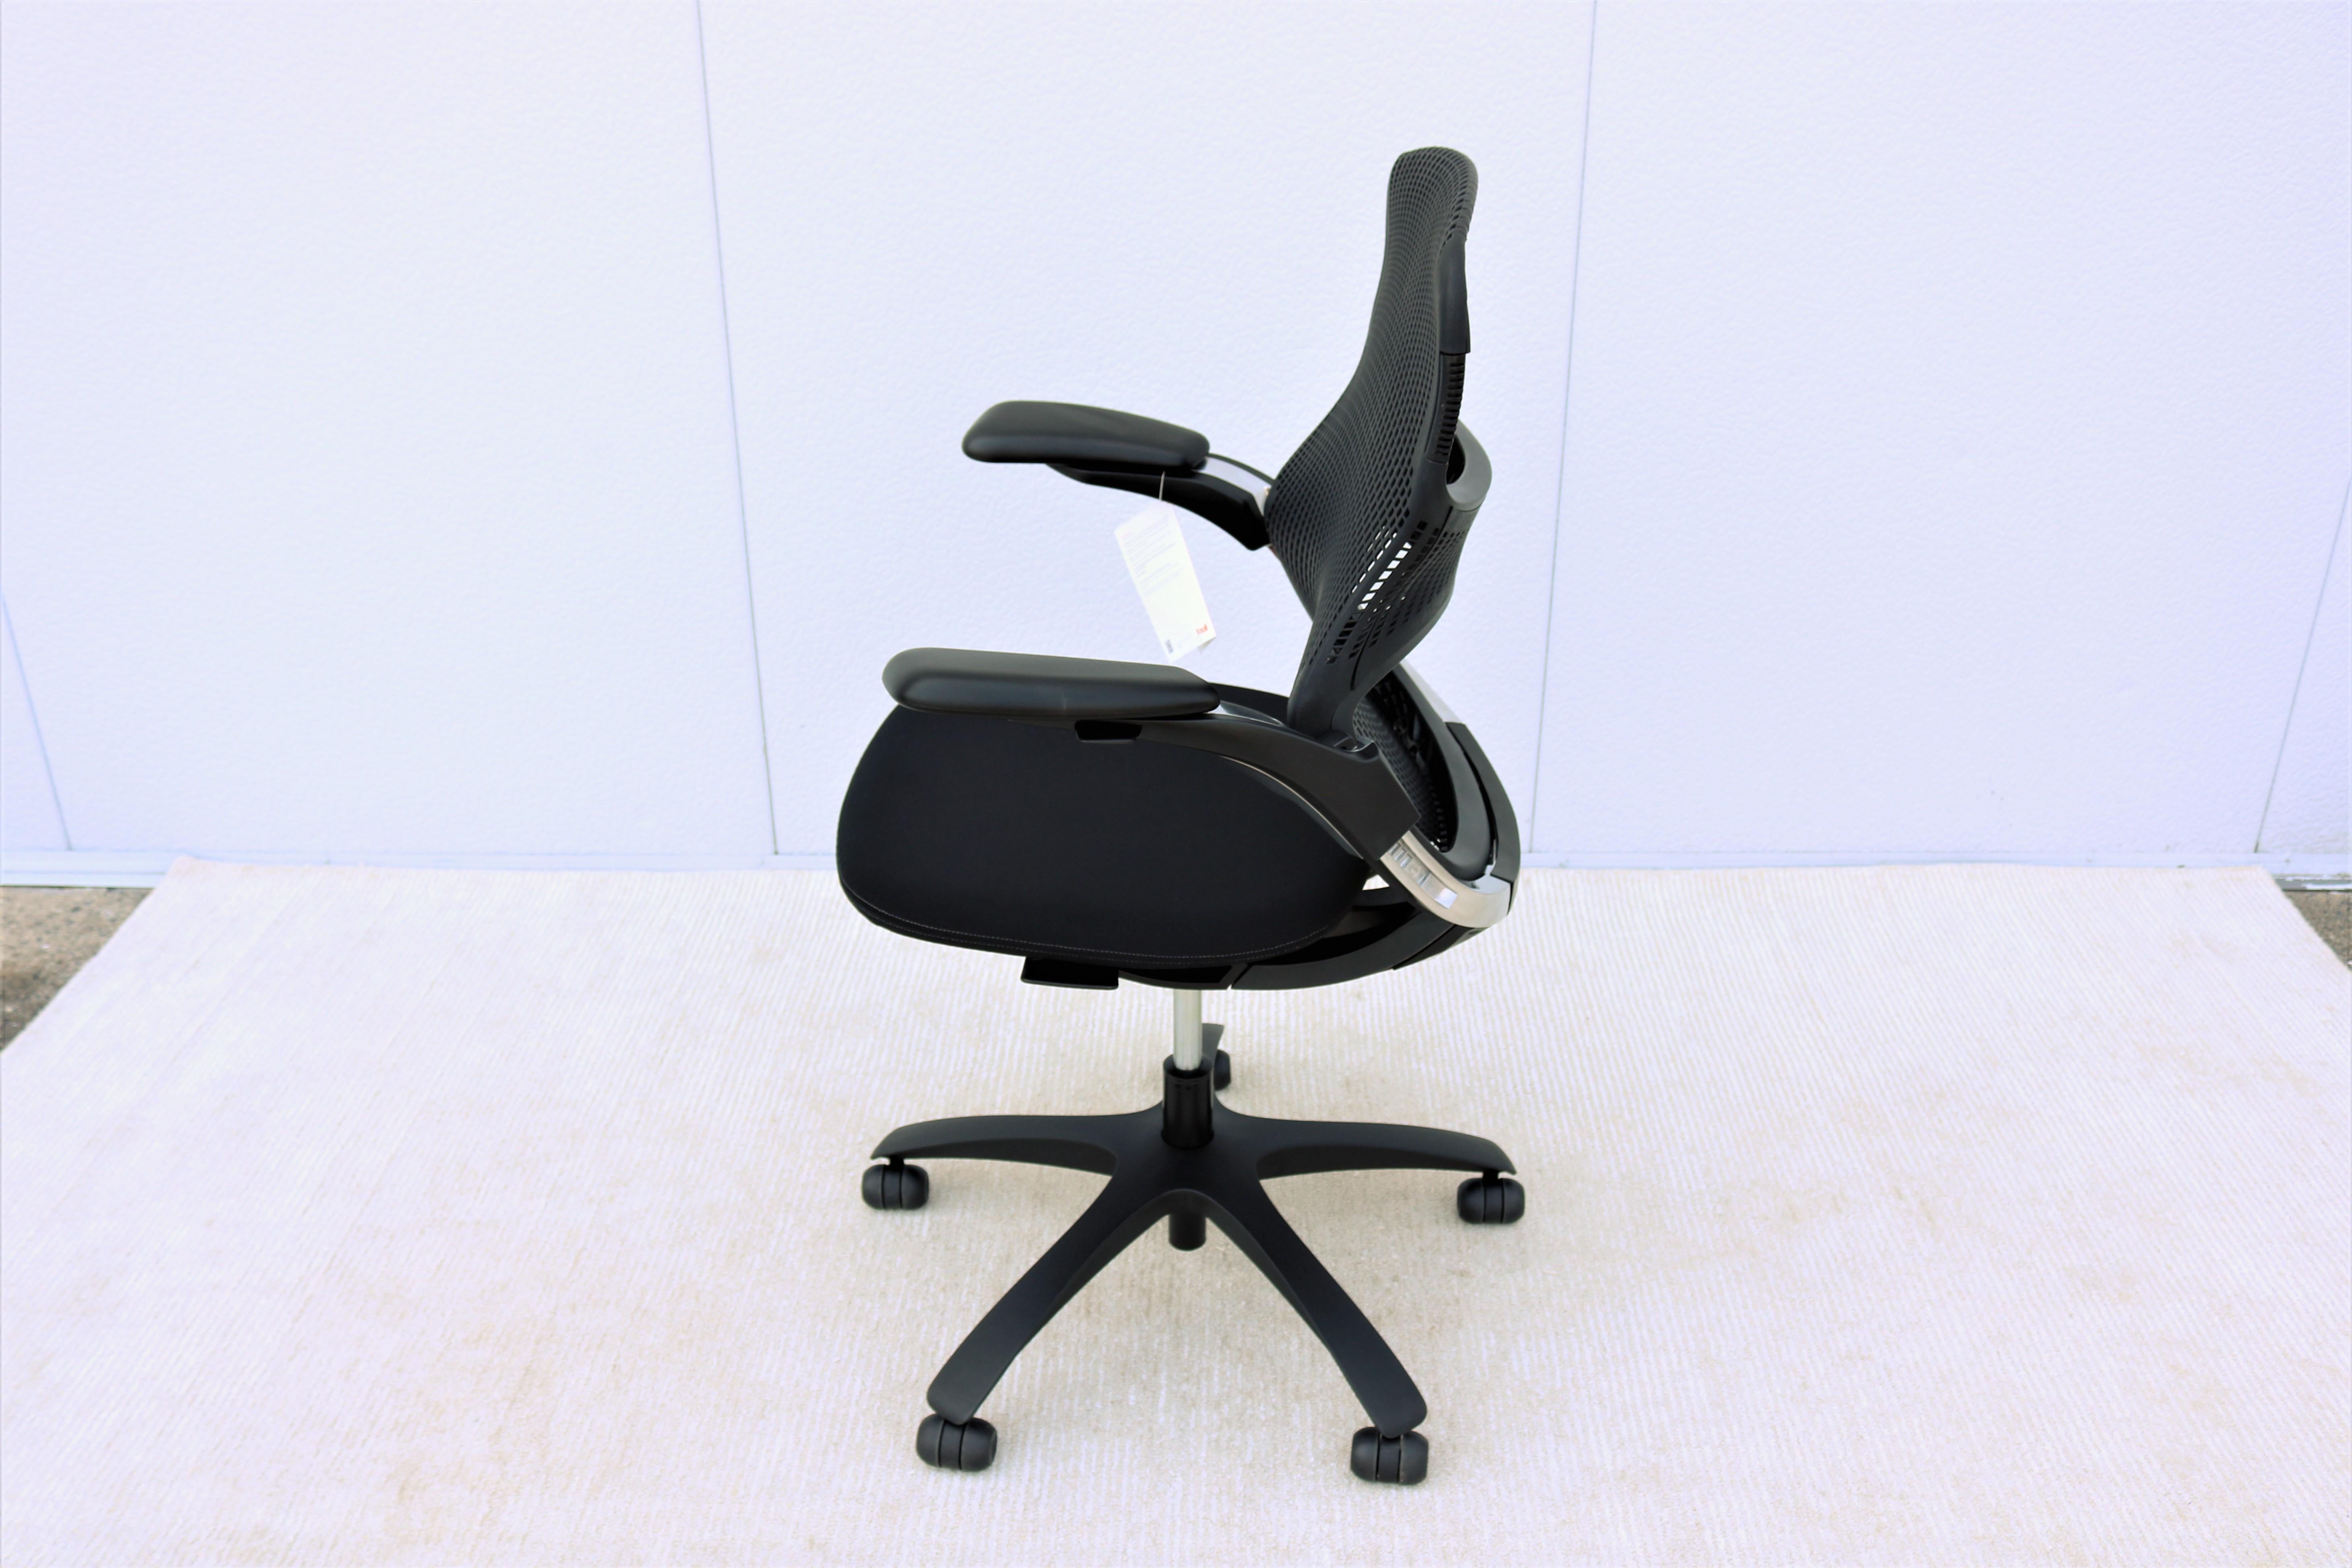 Contemporary Knoll Generation Black Ergonomic Office Desk Chair Fully Adjustable, Brand New For Sale